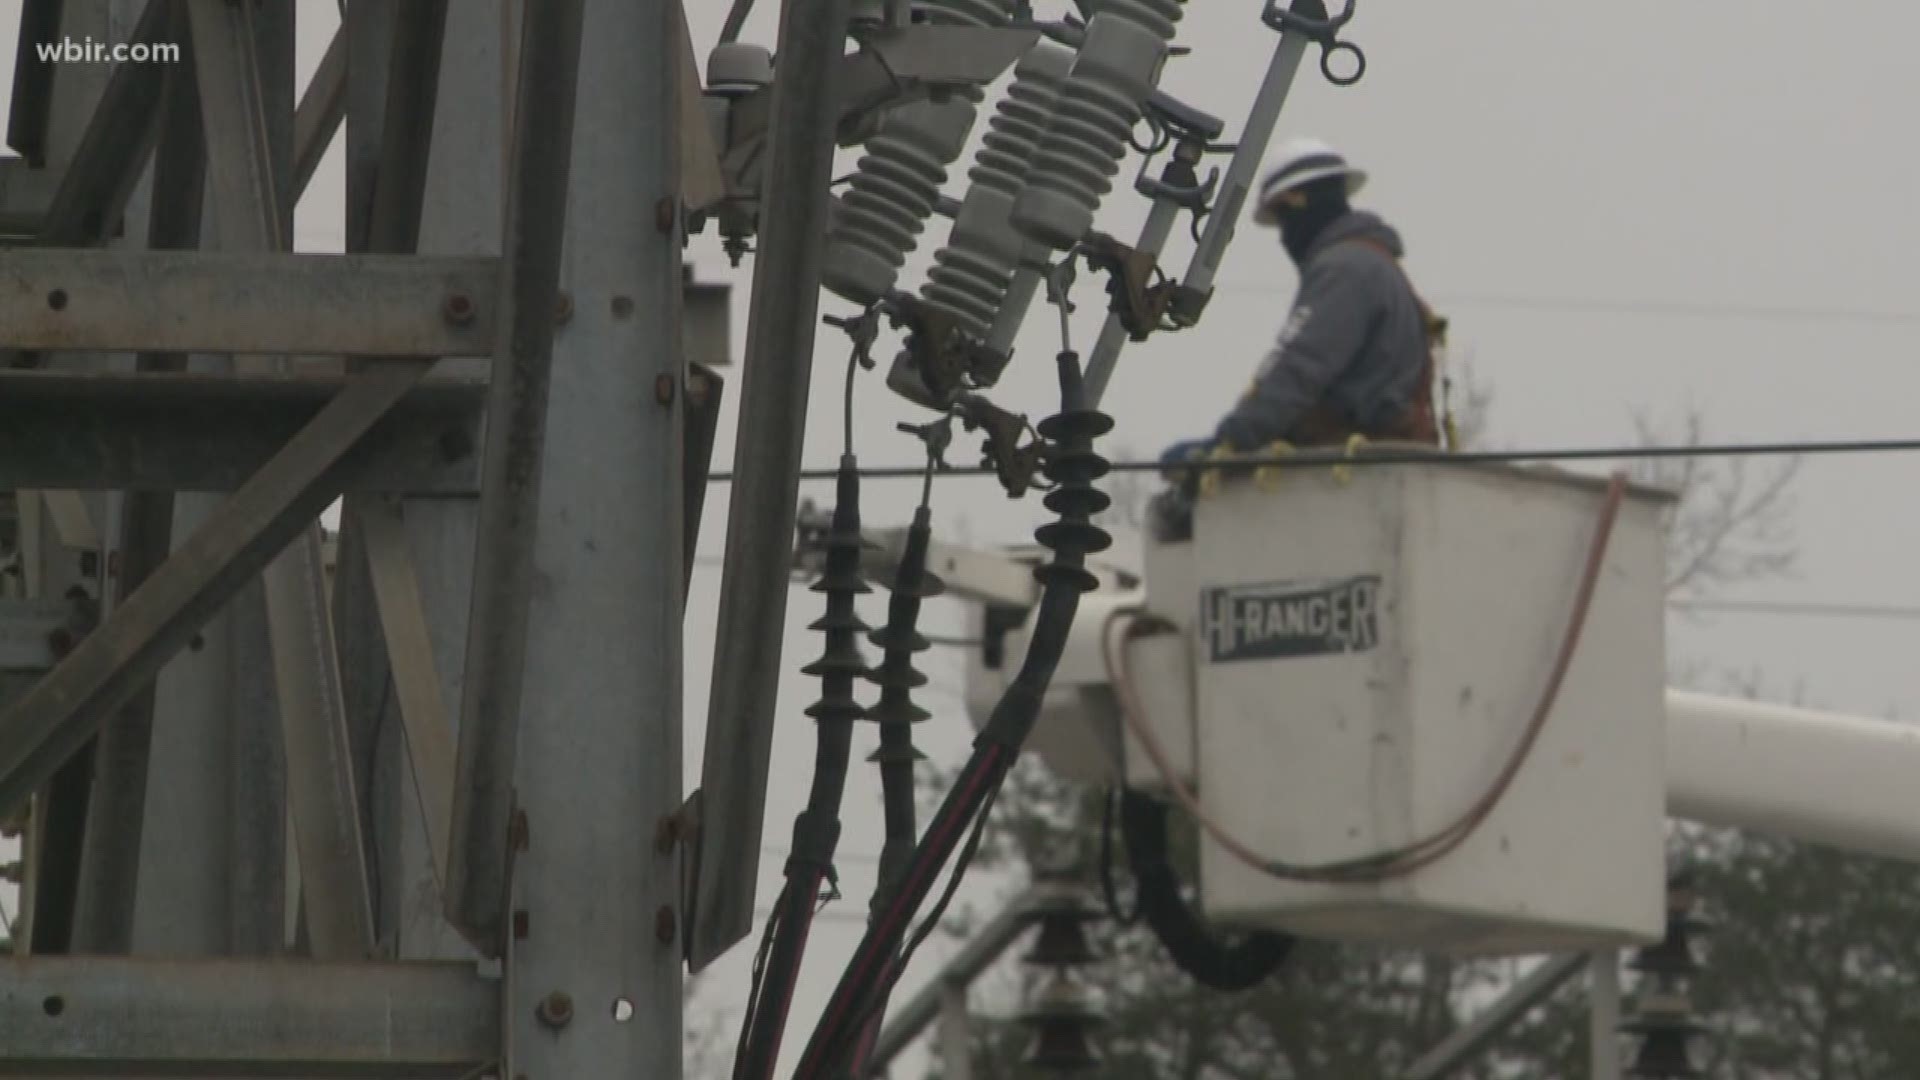 This morning around 5 a.m., with below freezing temps, power went out for 18,000 people in Cumberland County.